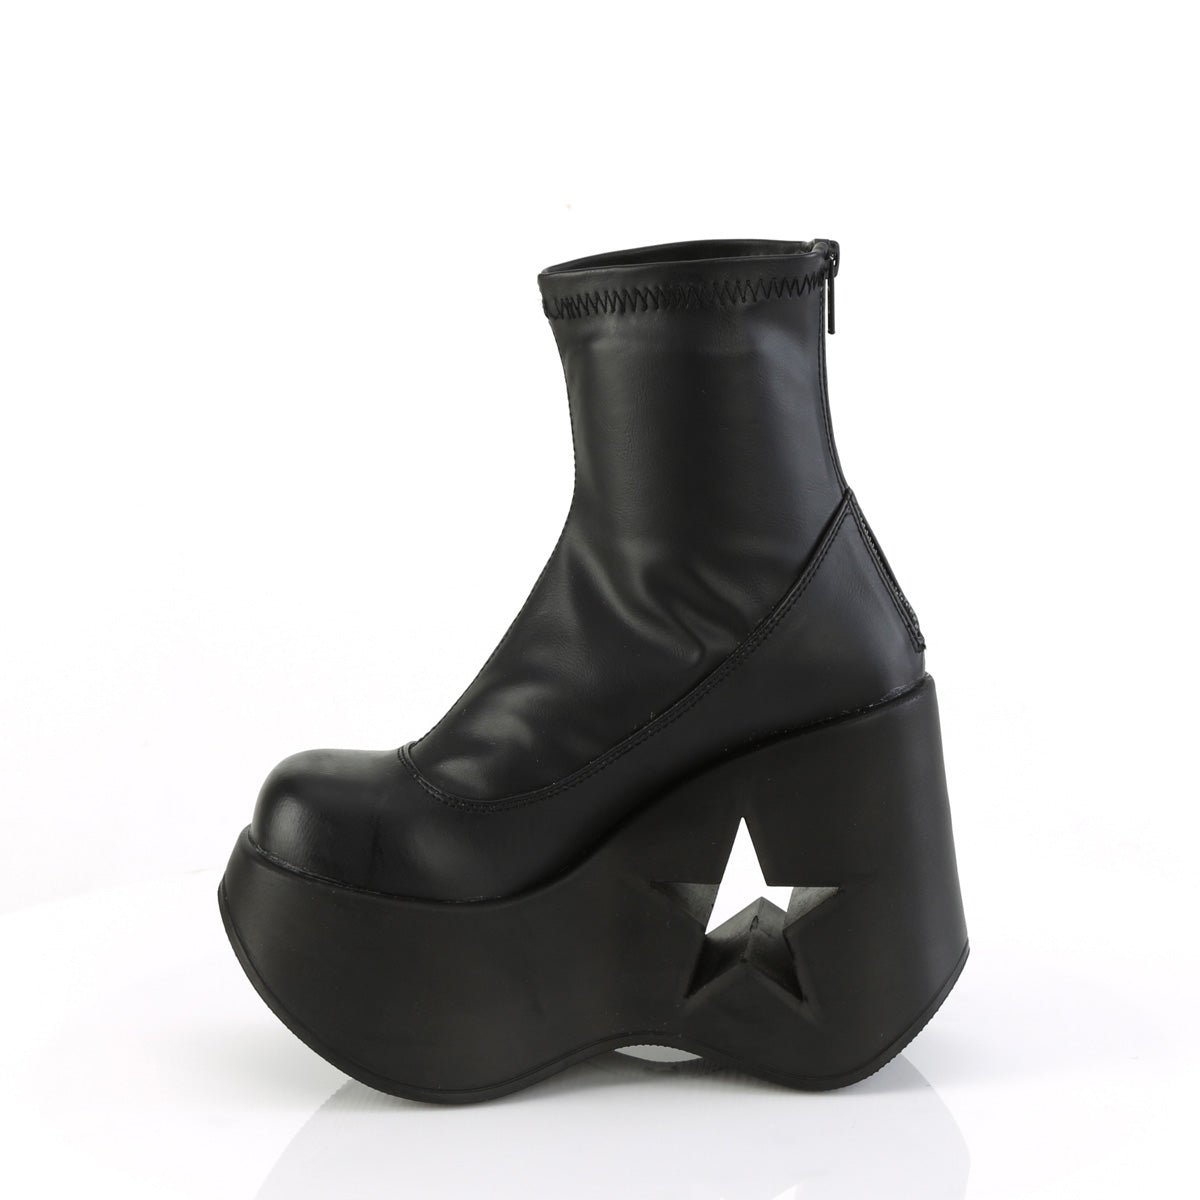 Too Fast | Demonia Dynamite 100 | Black Stretch Vegan Leather Women's Ankle Boots